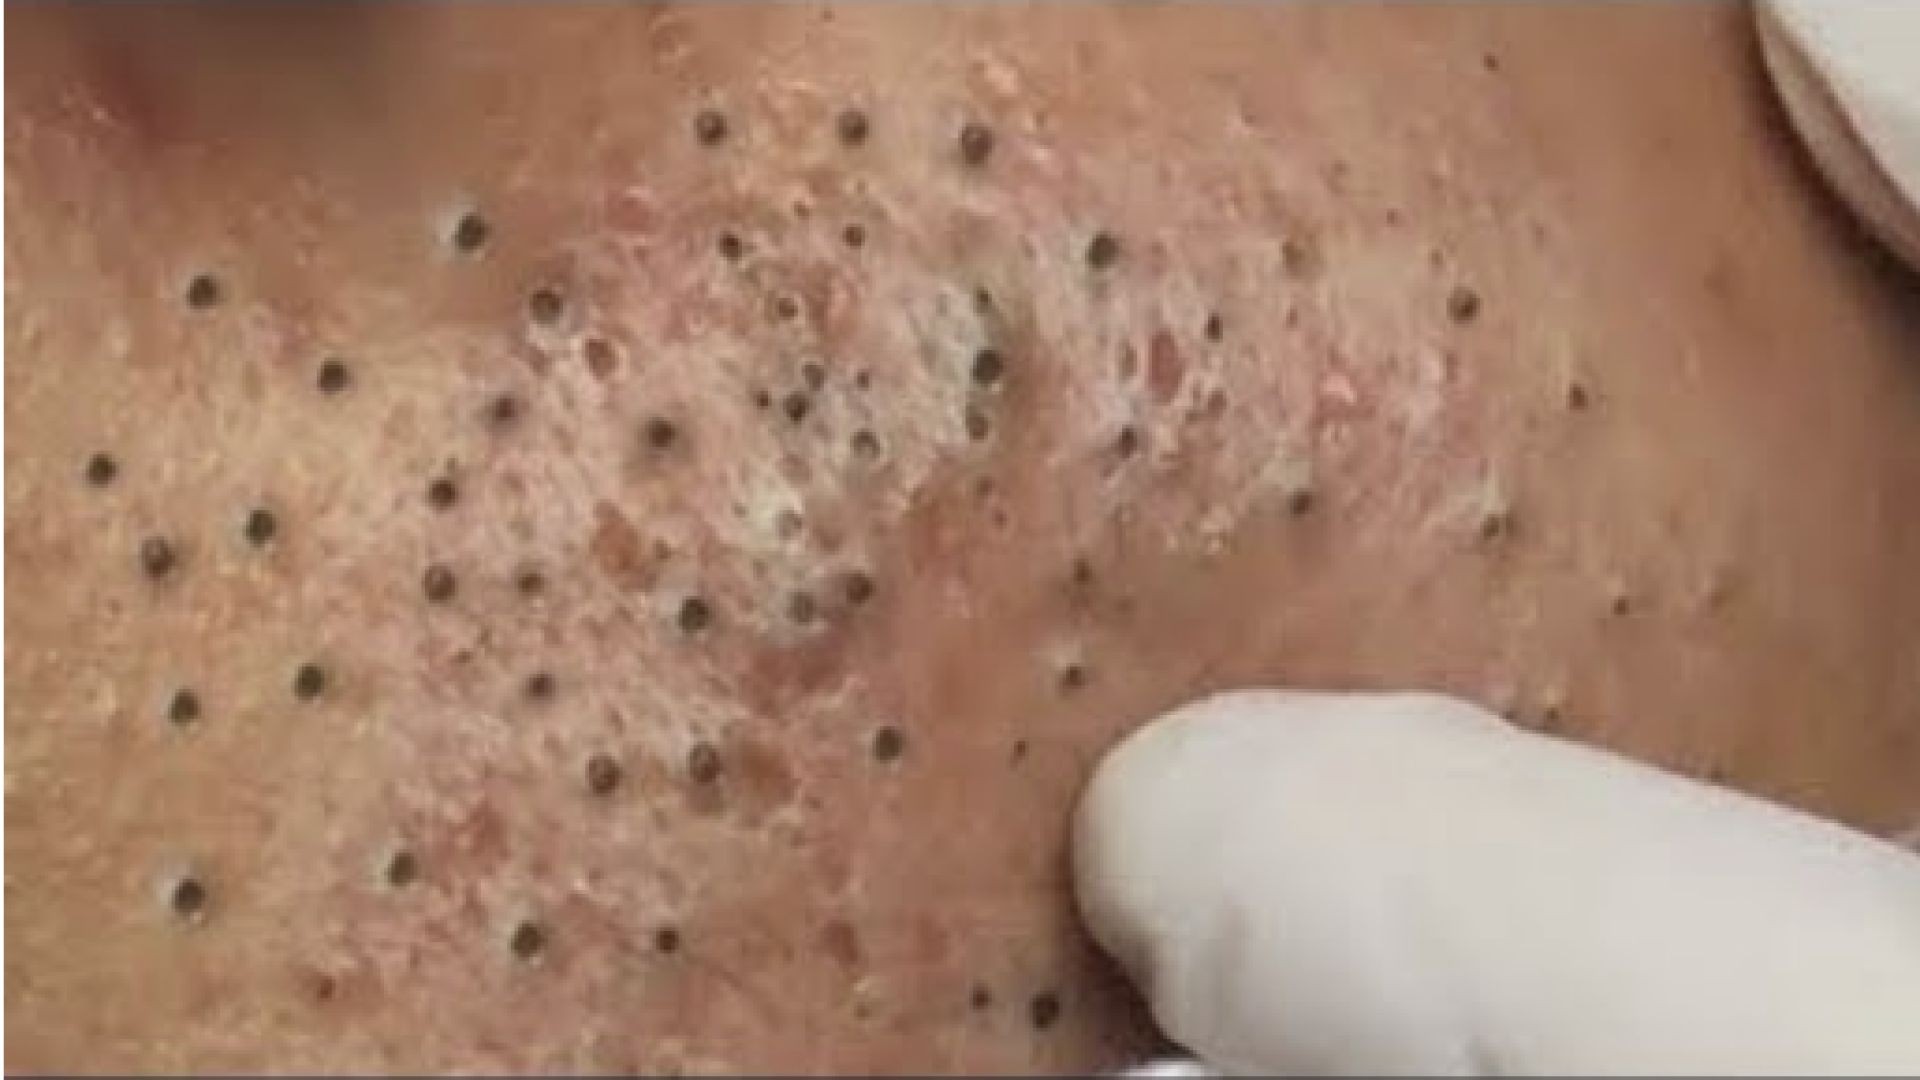 relaxing blackheads removal pimple popping videos blackheads removal large blackheads popping